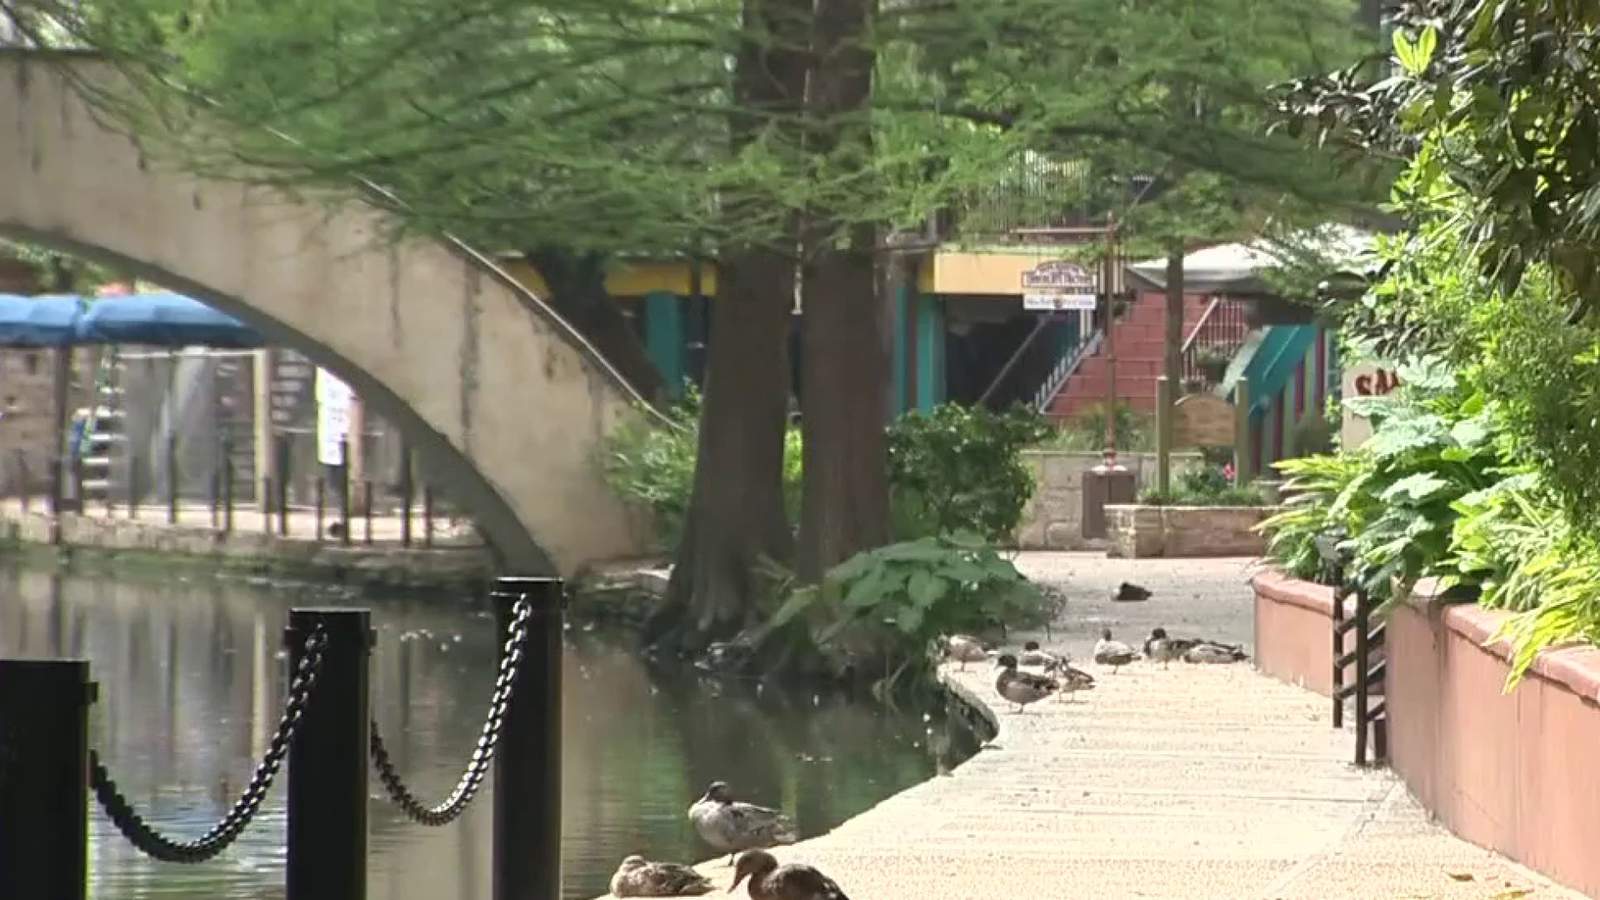 Residents enjoy Saturday at Riverwalk after new state orders to reopen Texas